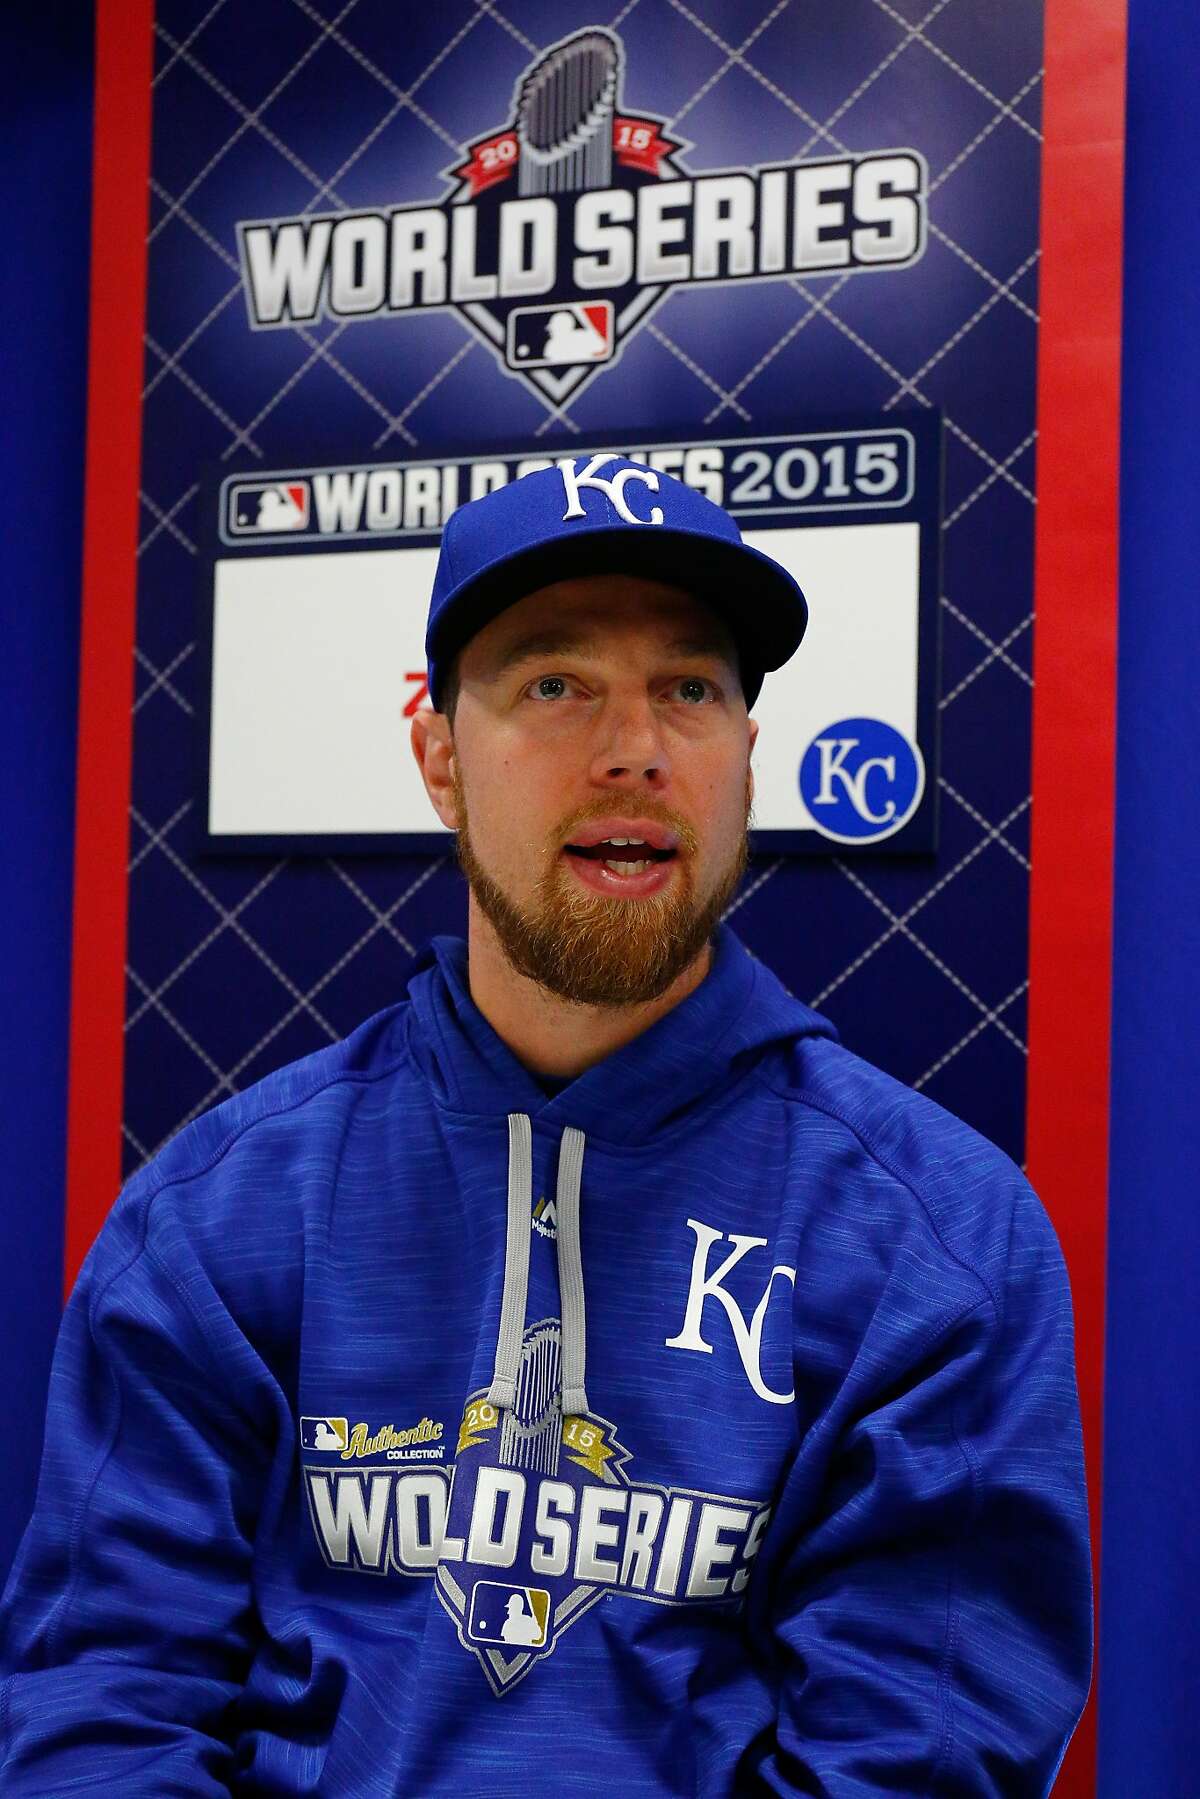 Ben Zobrist of the Kansas City Royals addresses the media the day before Game 1 of the 2015 World Series between the Royals and New York Mets at Kauffman Stadium on October 26, 2015 in Kansas City, Missouri.